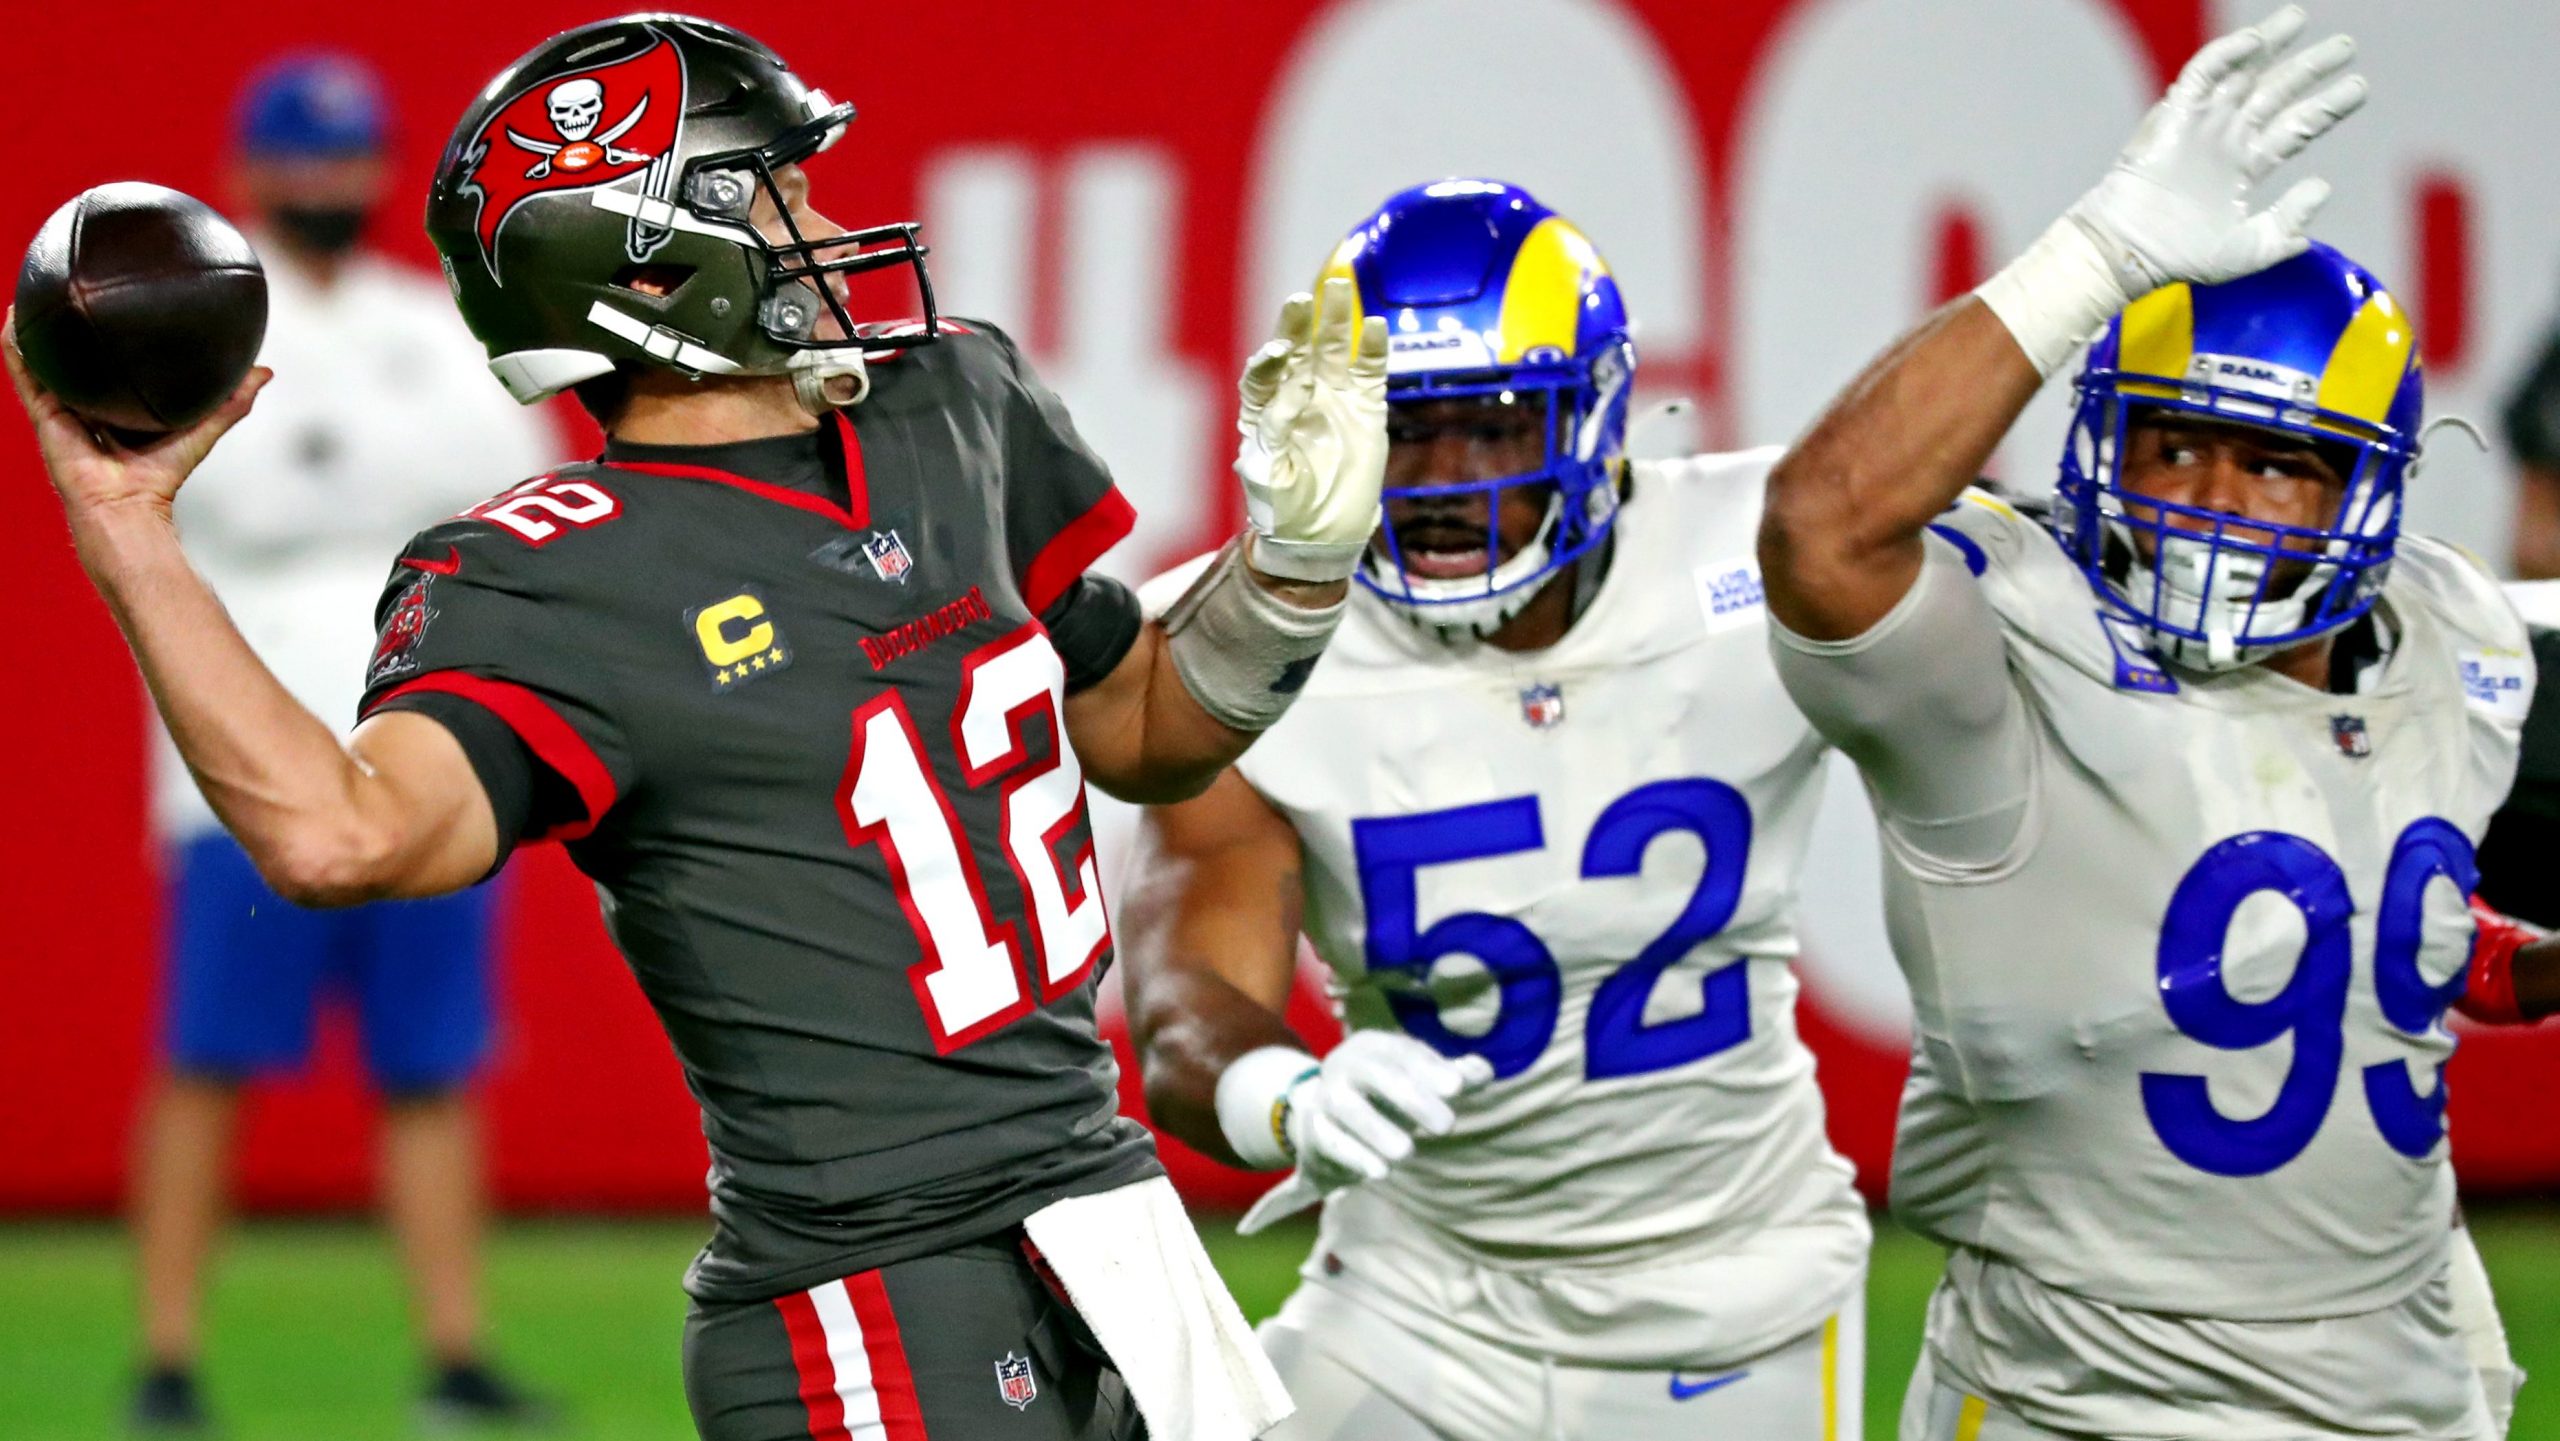 Bruce Arians: Bucs’ offense comes down to whether “quarterback plays well or not”